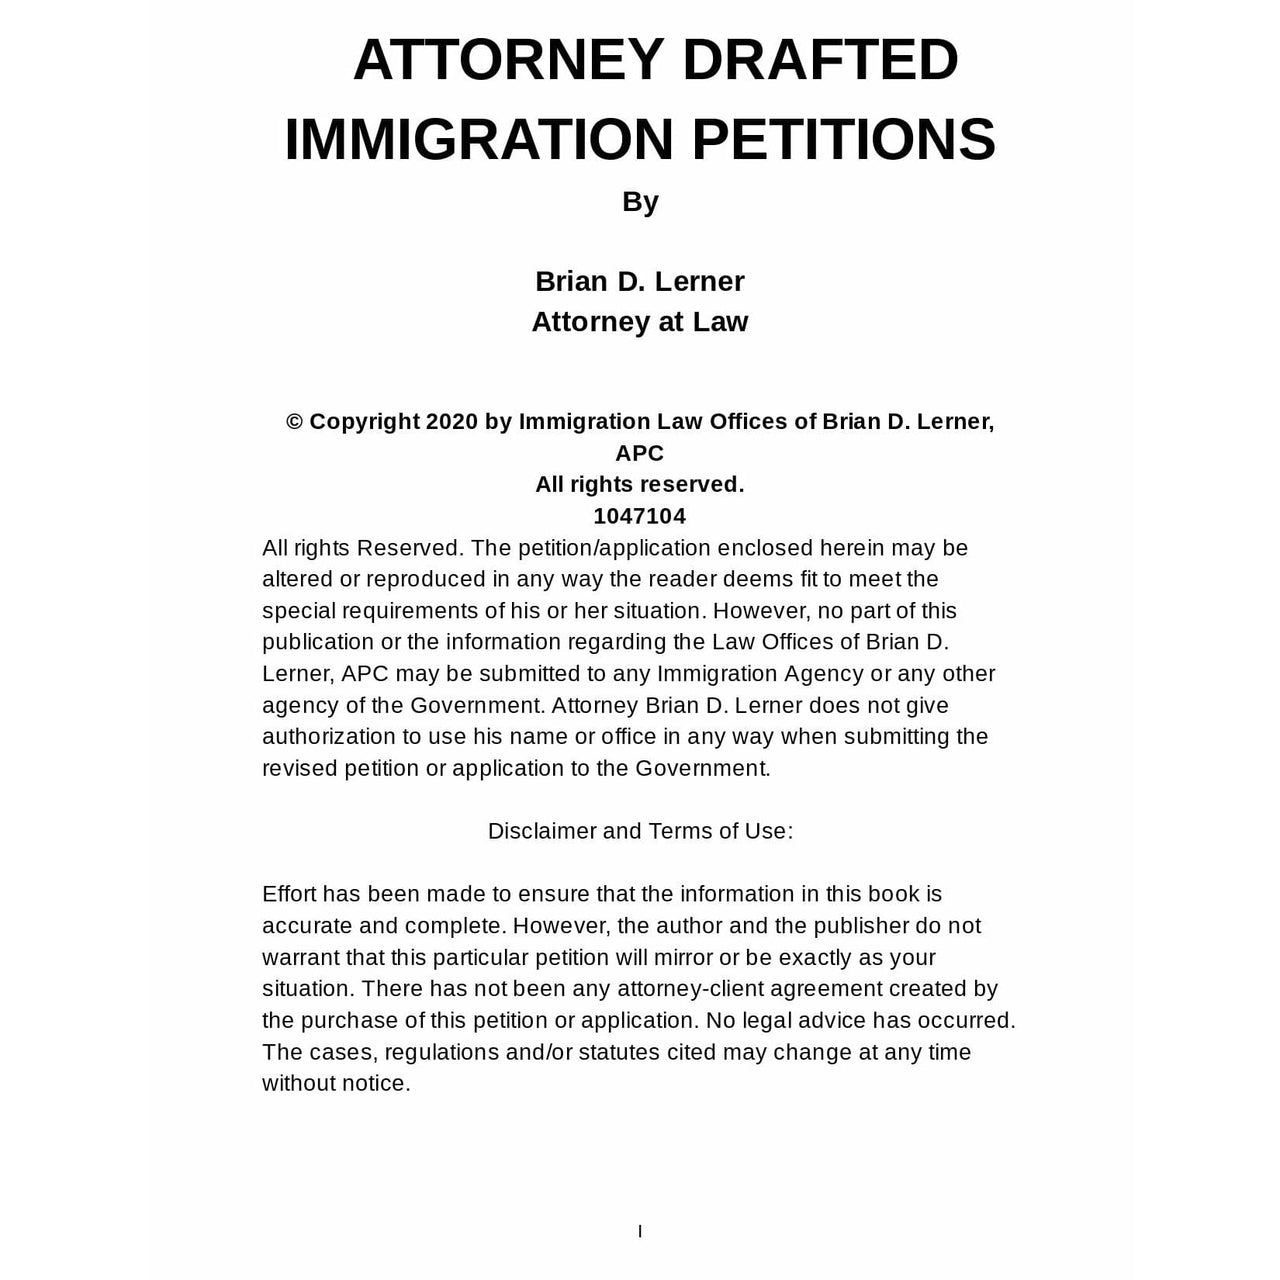 Application for Political Asylum with Derivatives/Dependants - Rocket Immigration Petitions